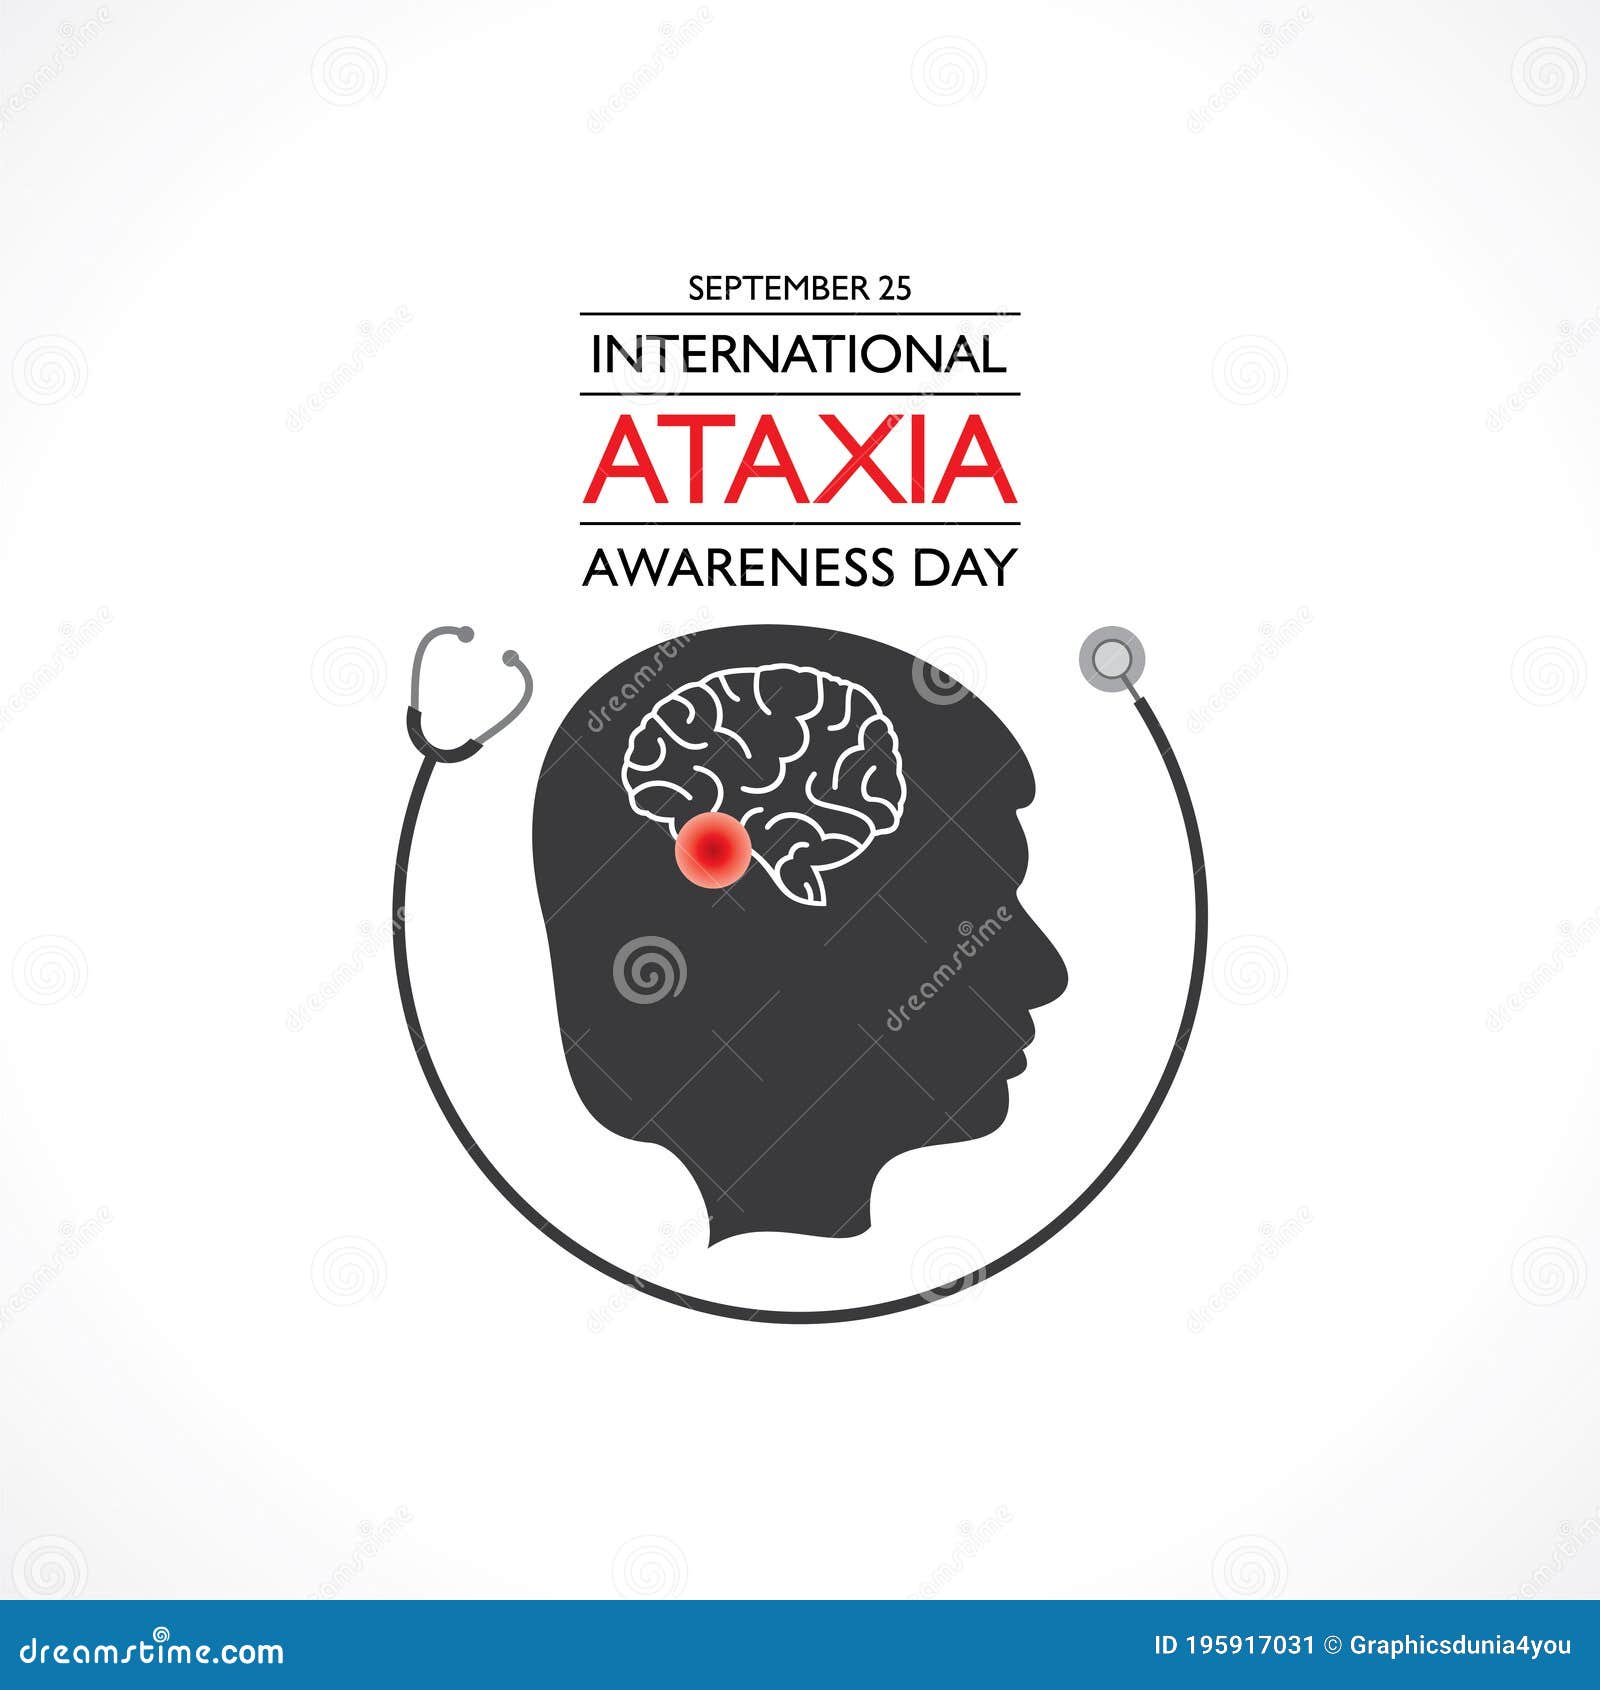 international ataxia awareness day observed on september 25